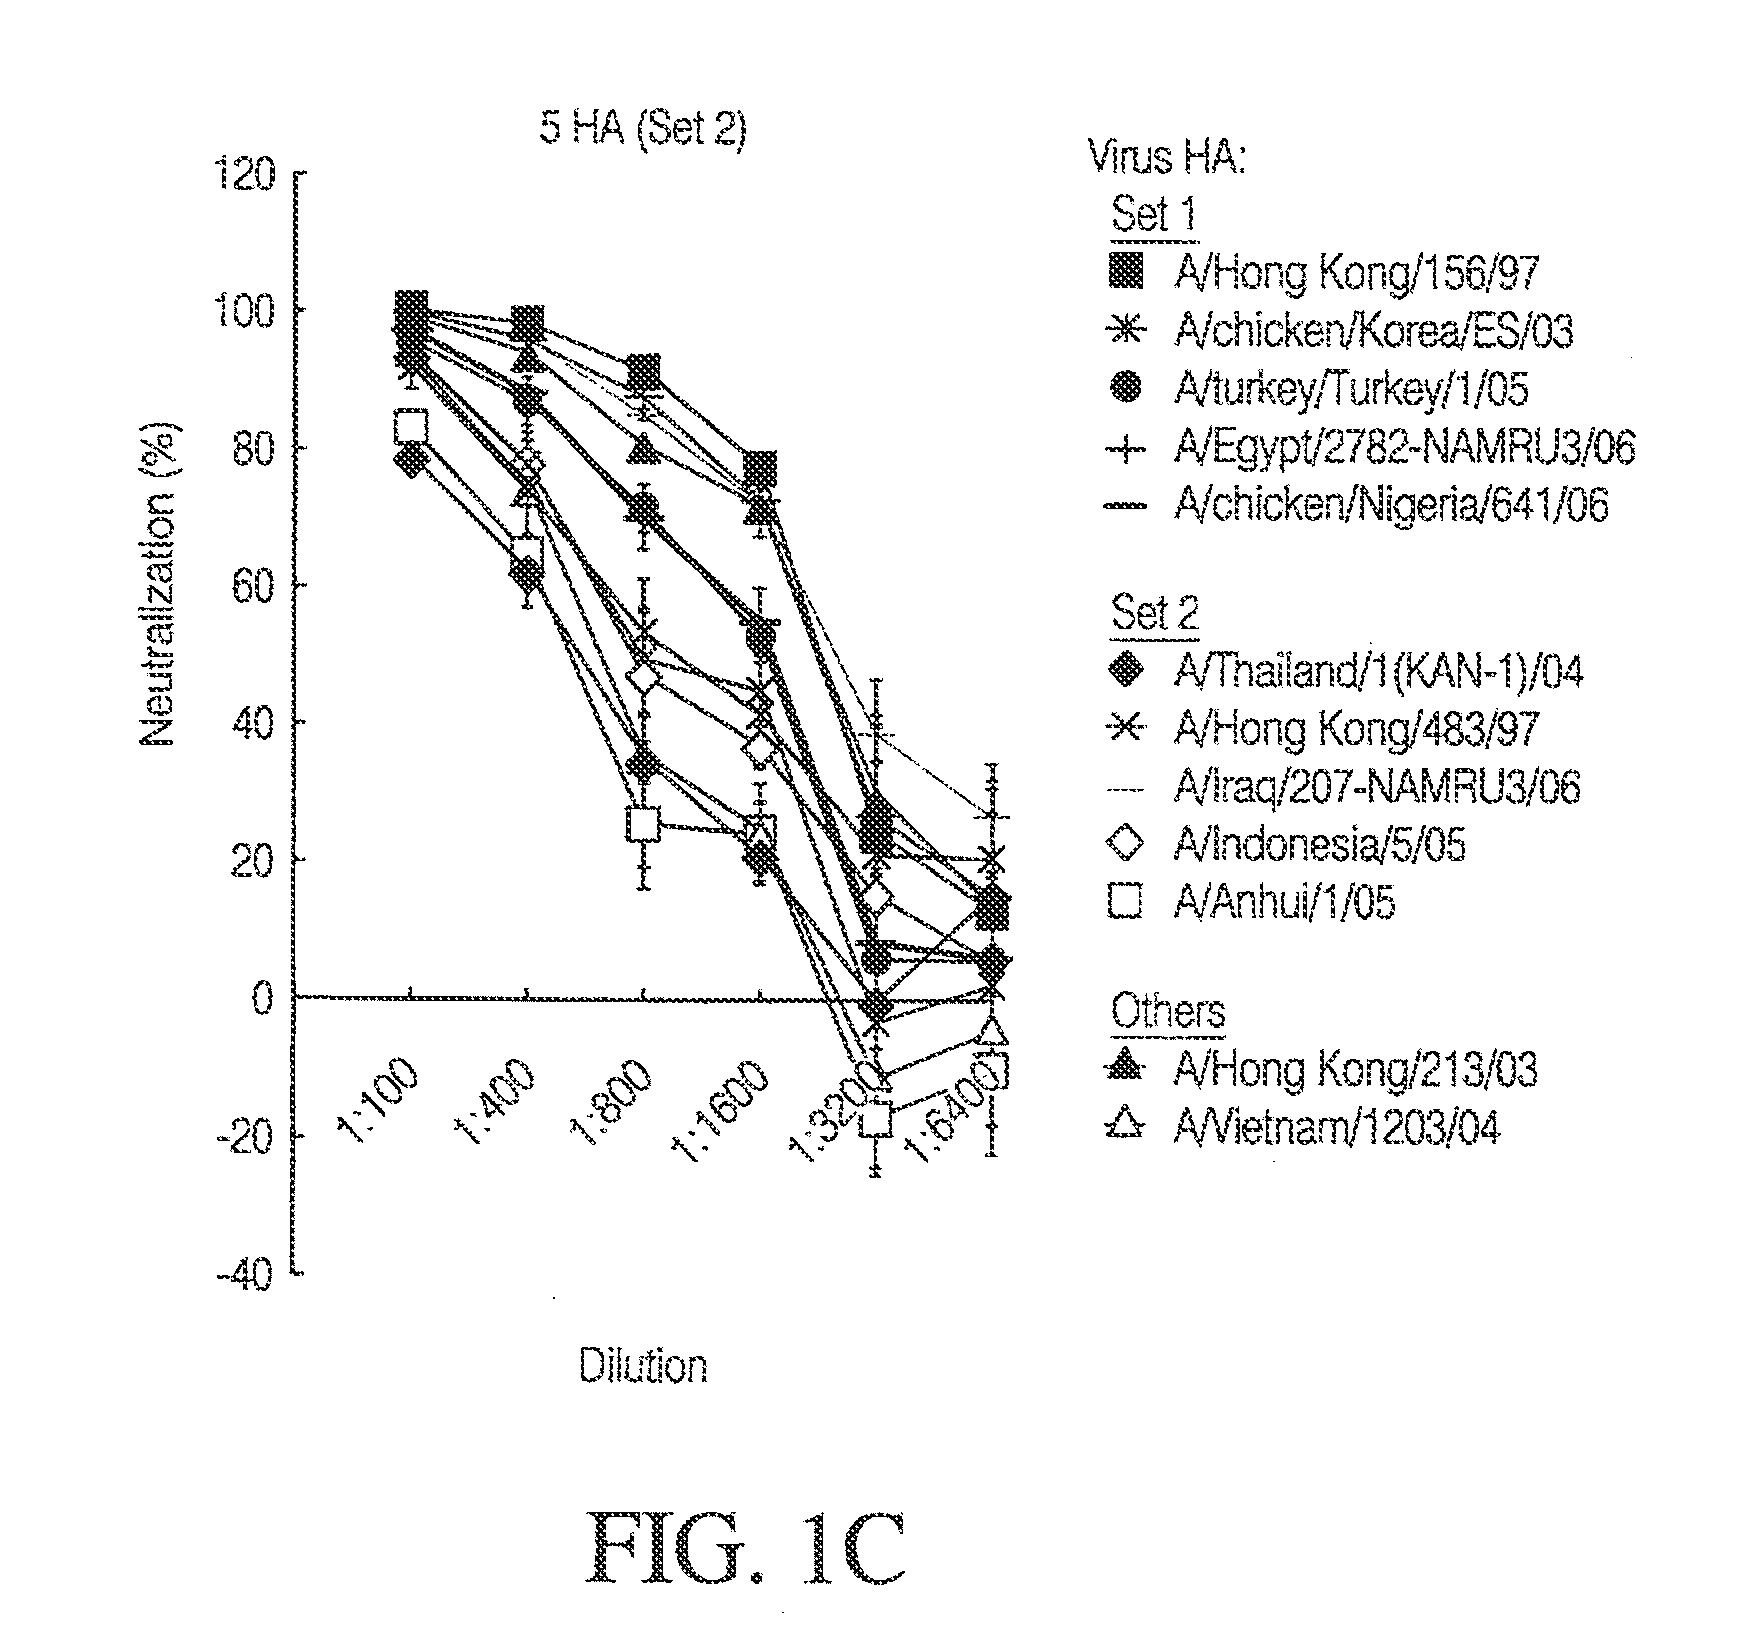 Influenza DNA vaccination and methods of use thereof